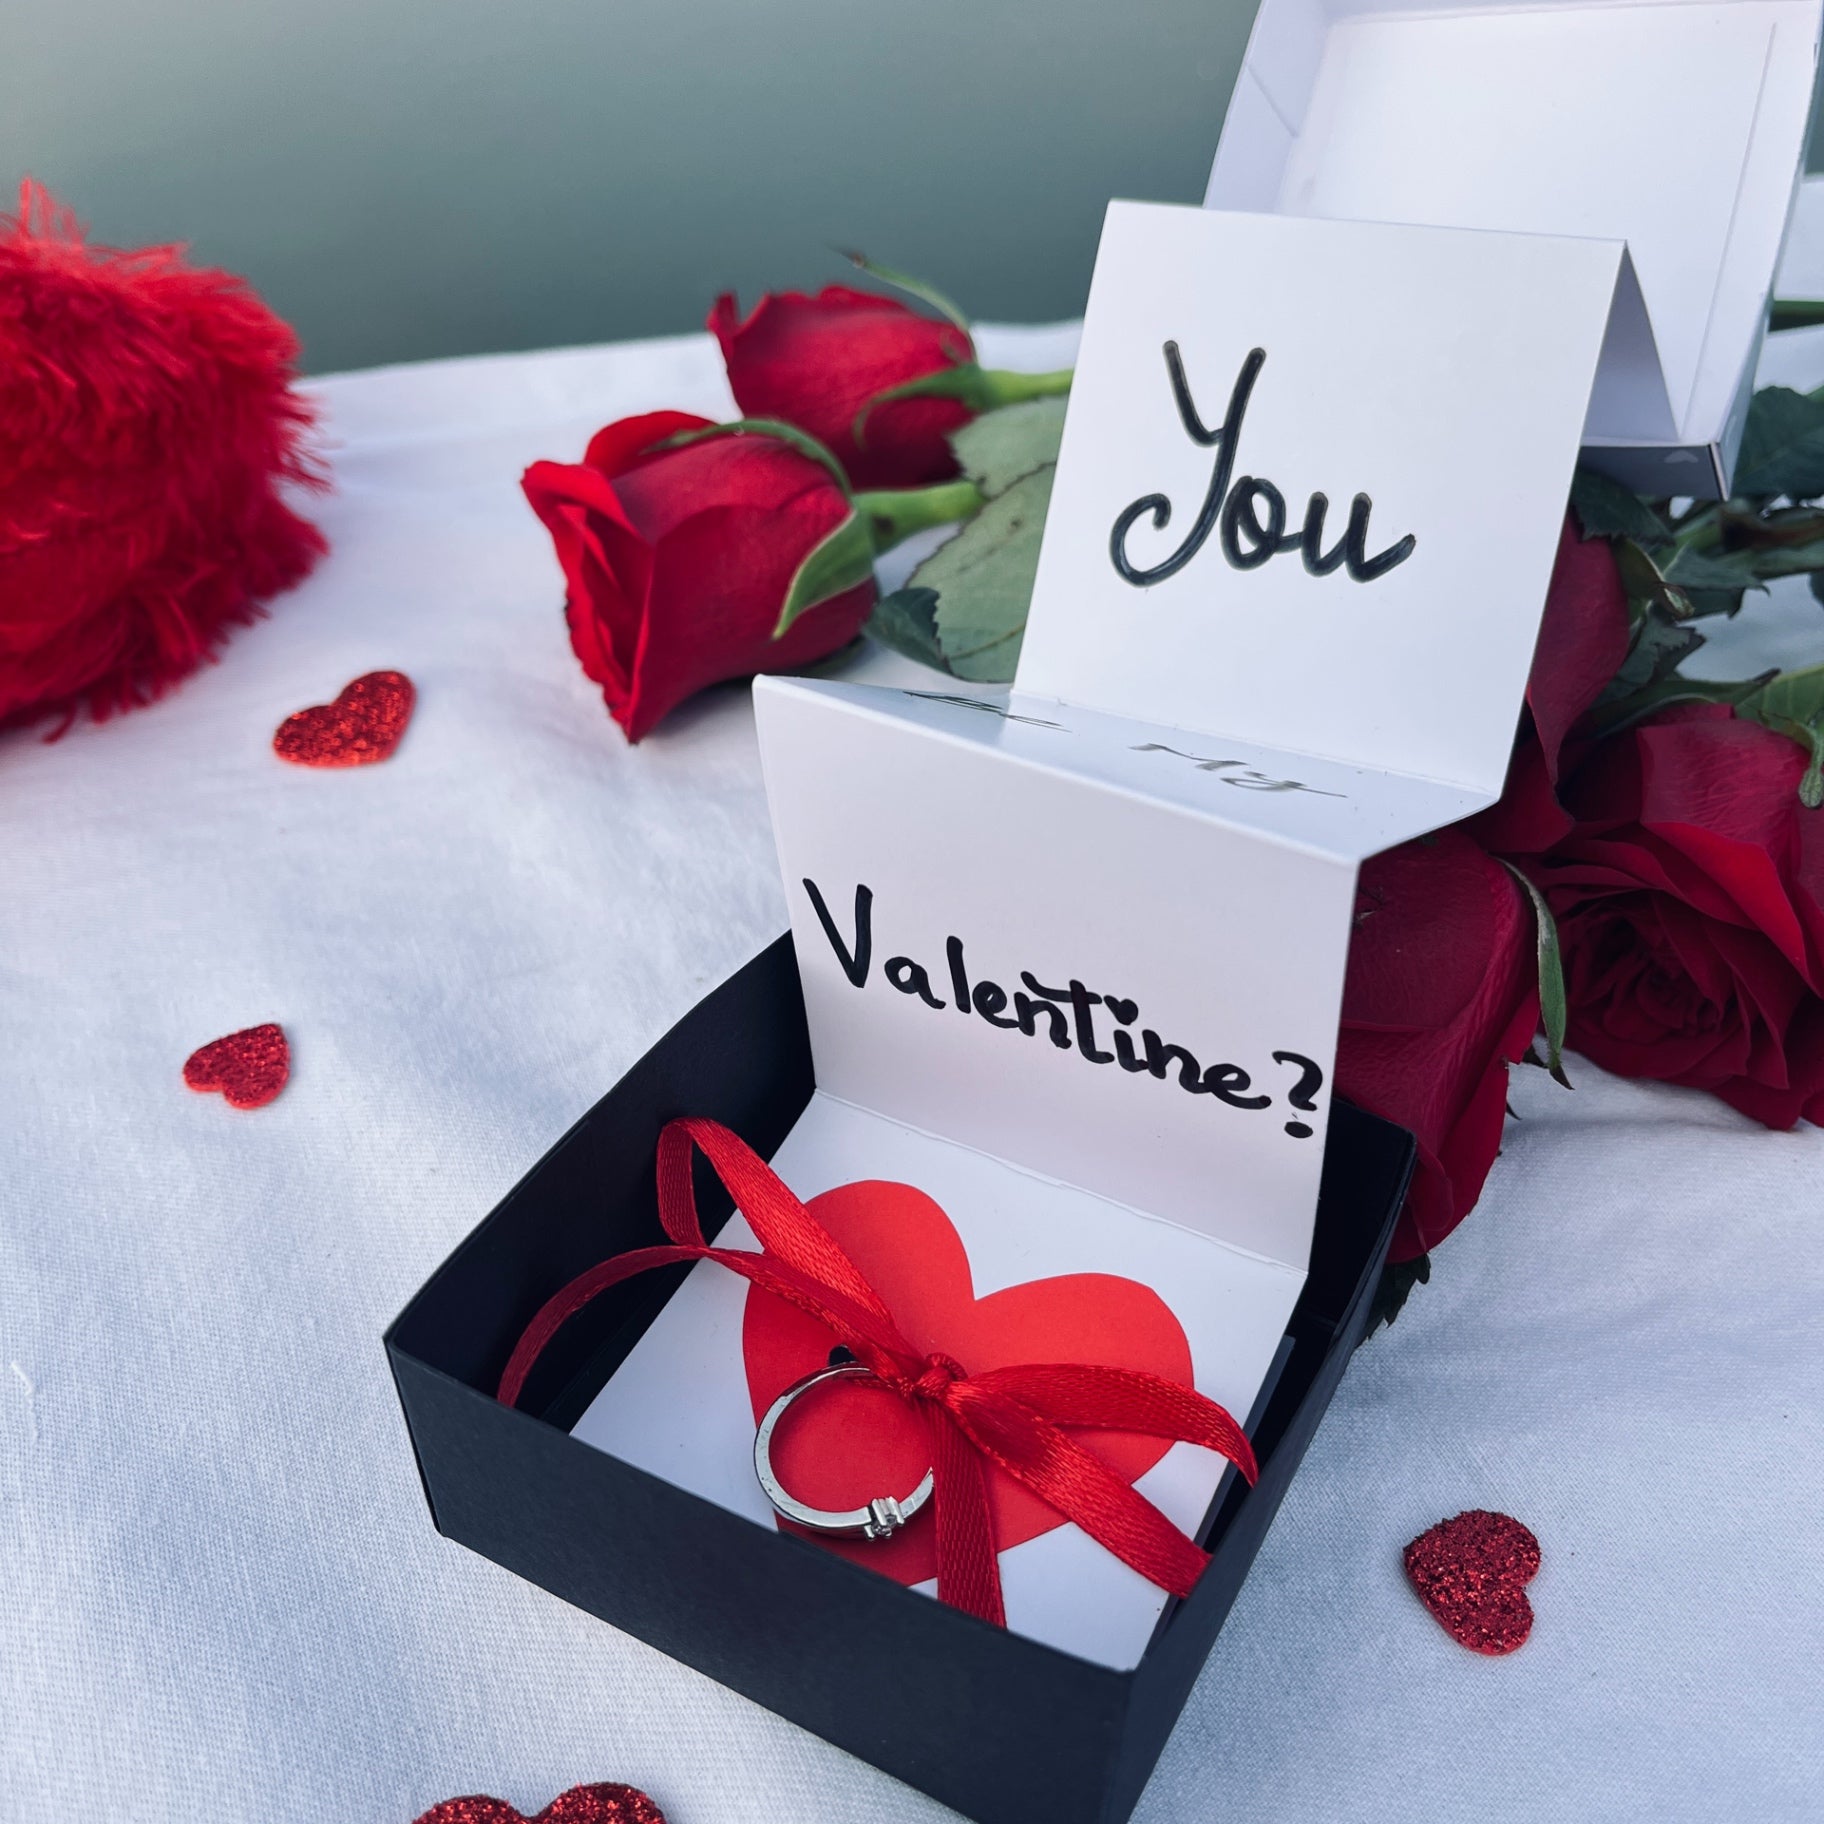 Propose Day Gifts: Best Love Proposal Gifts in Dubai, UAE - IGP